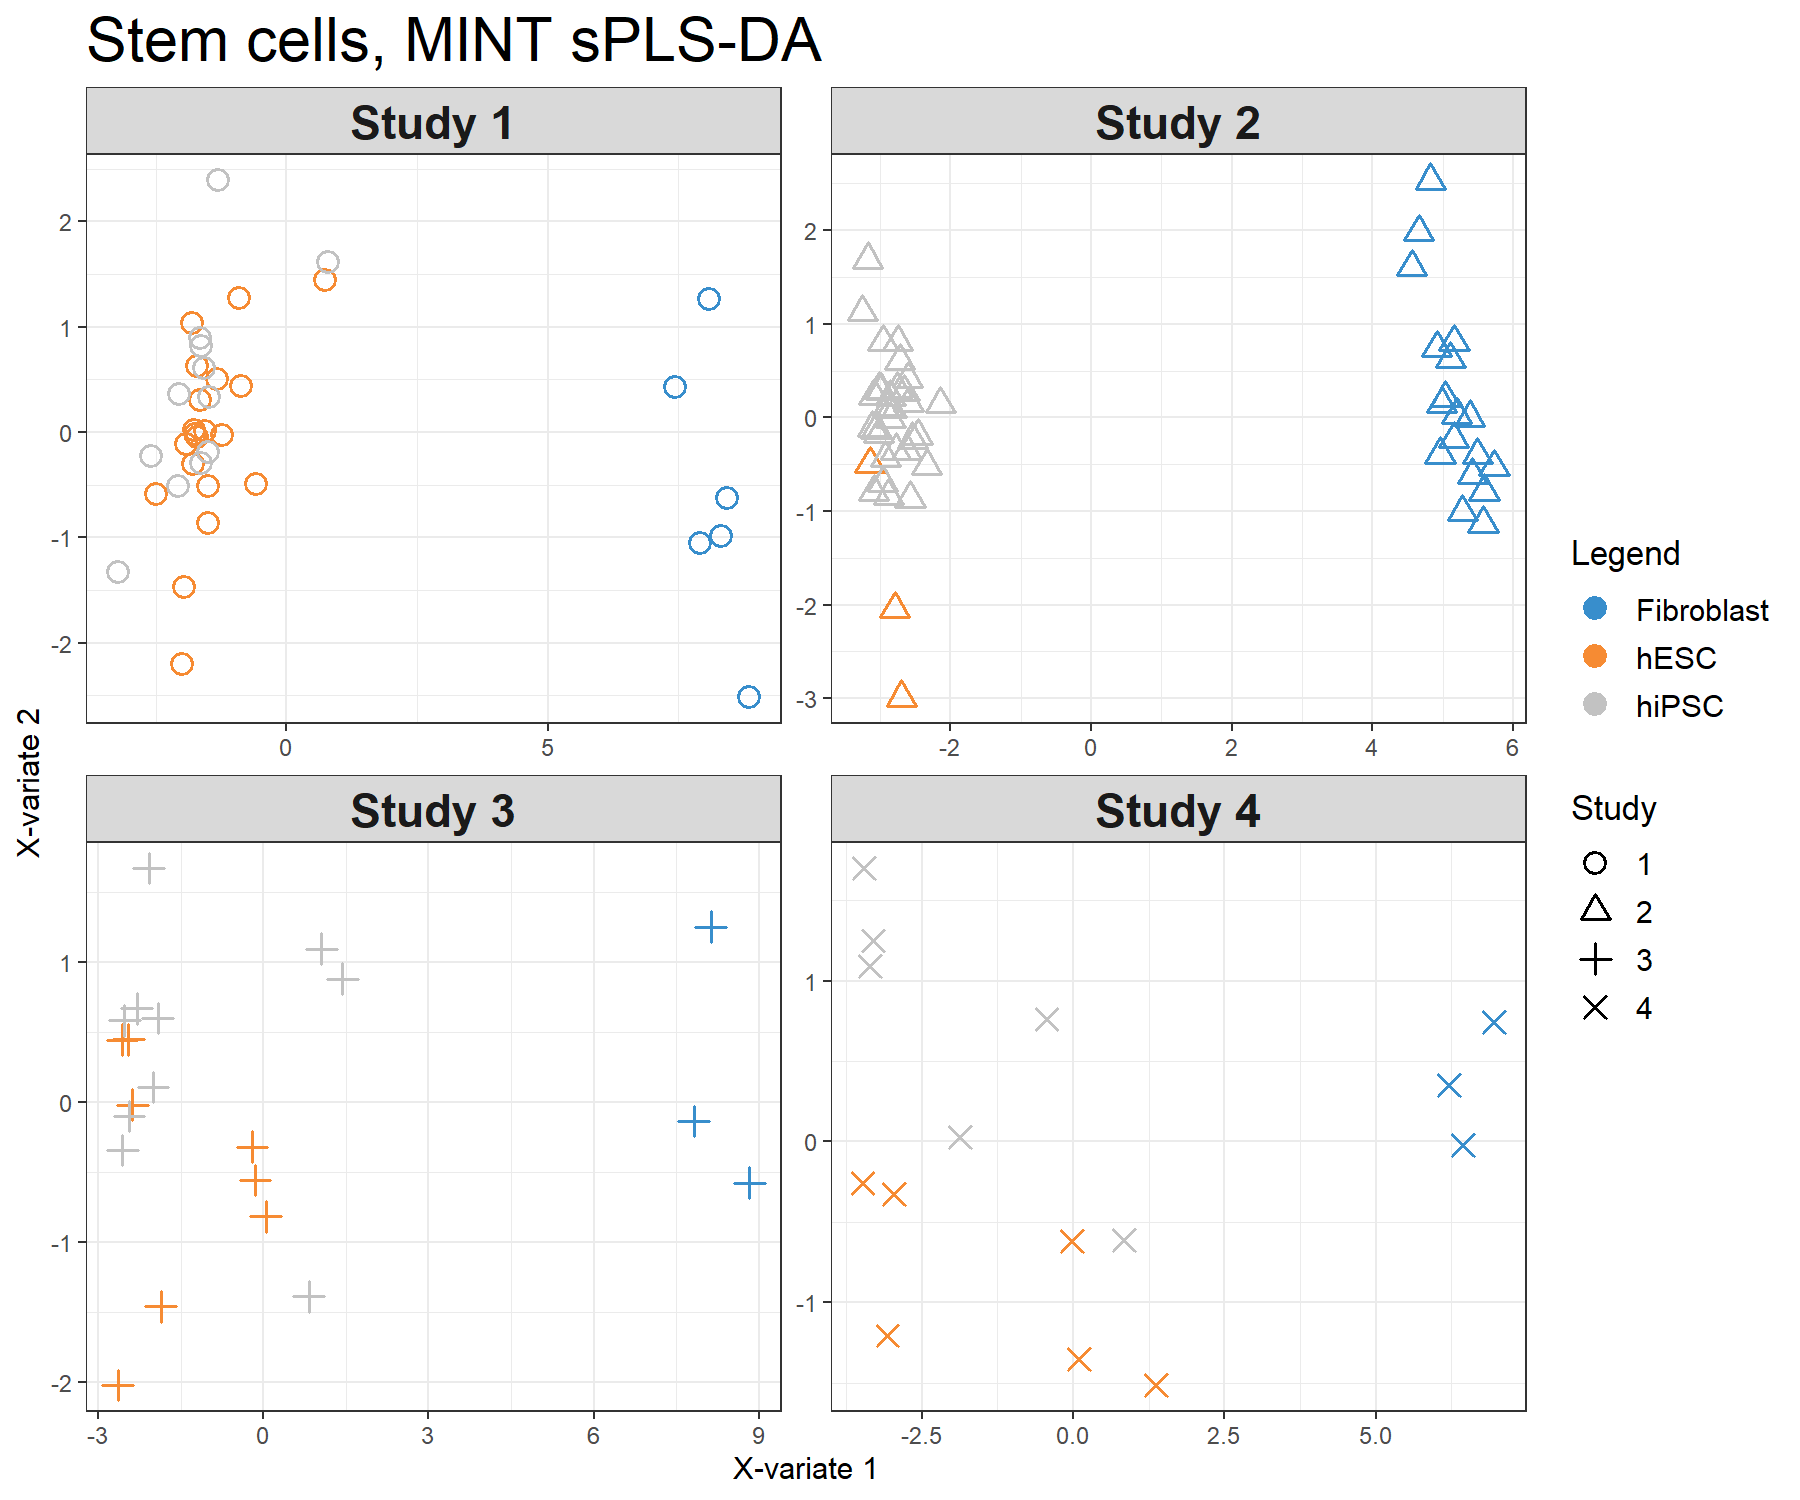 Sample plots from the MINT sPLS-DA performed on the stemcells gene expression data. Samples are projected into the space spanned by the first two components. Samples are coloured by their cell types and symbols indicate study membership. (a) Global components from the model with 95% ellipse confidence intervals around each sample class. (b) Partial components per study show a good agreement across studies. Component 1 discriminates fibroblast vs. the rest, component 2 discriminates further hESC vs. hiPSC.